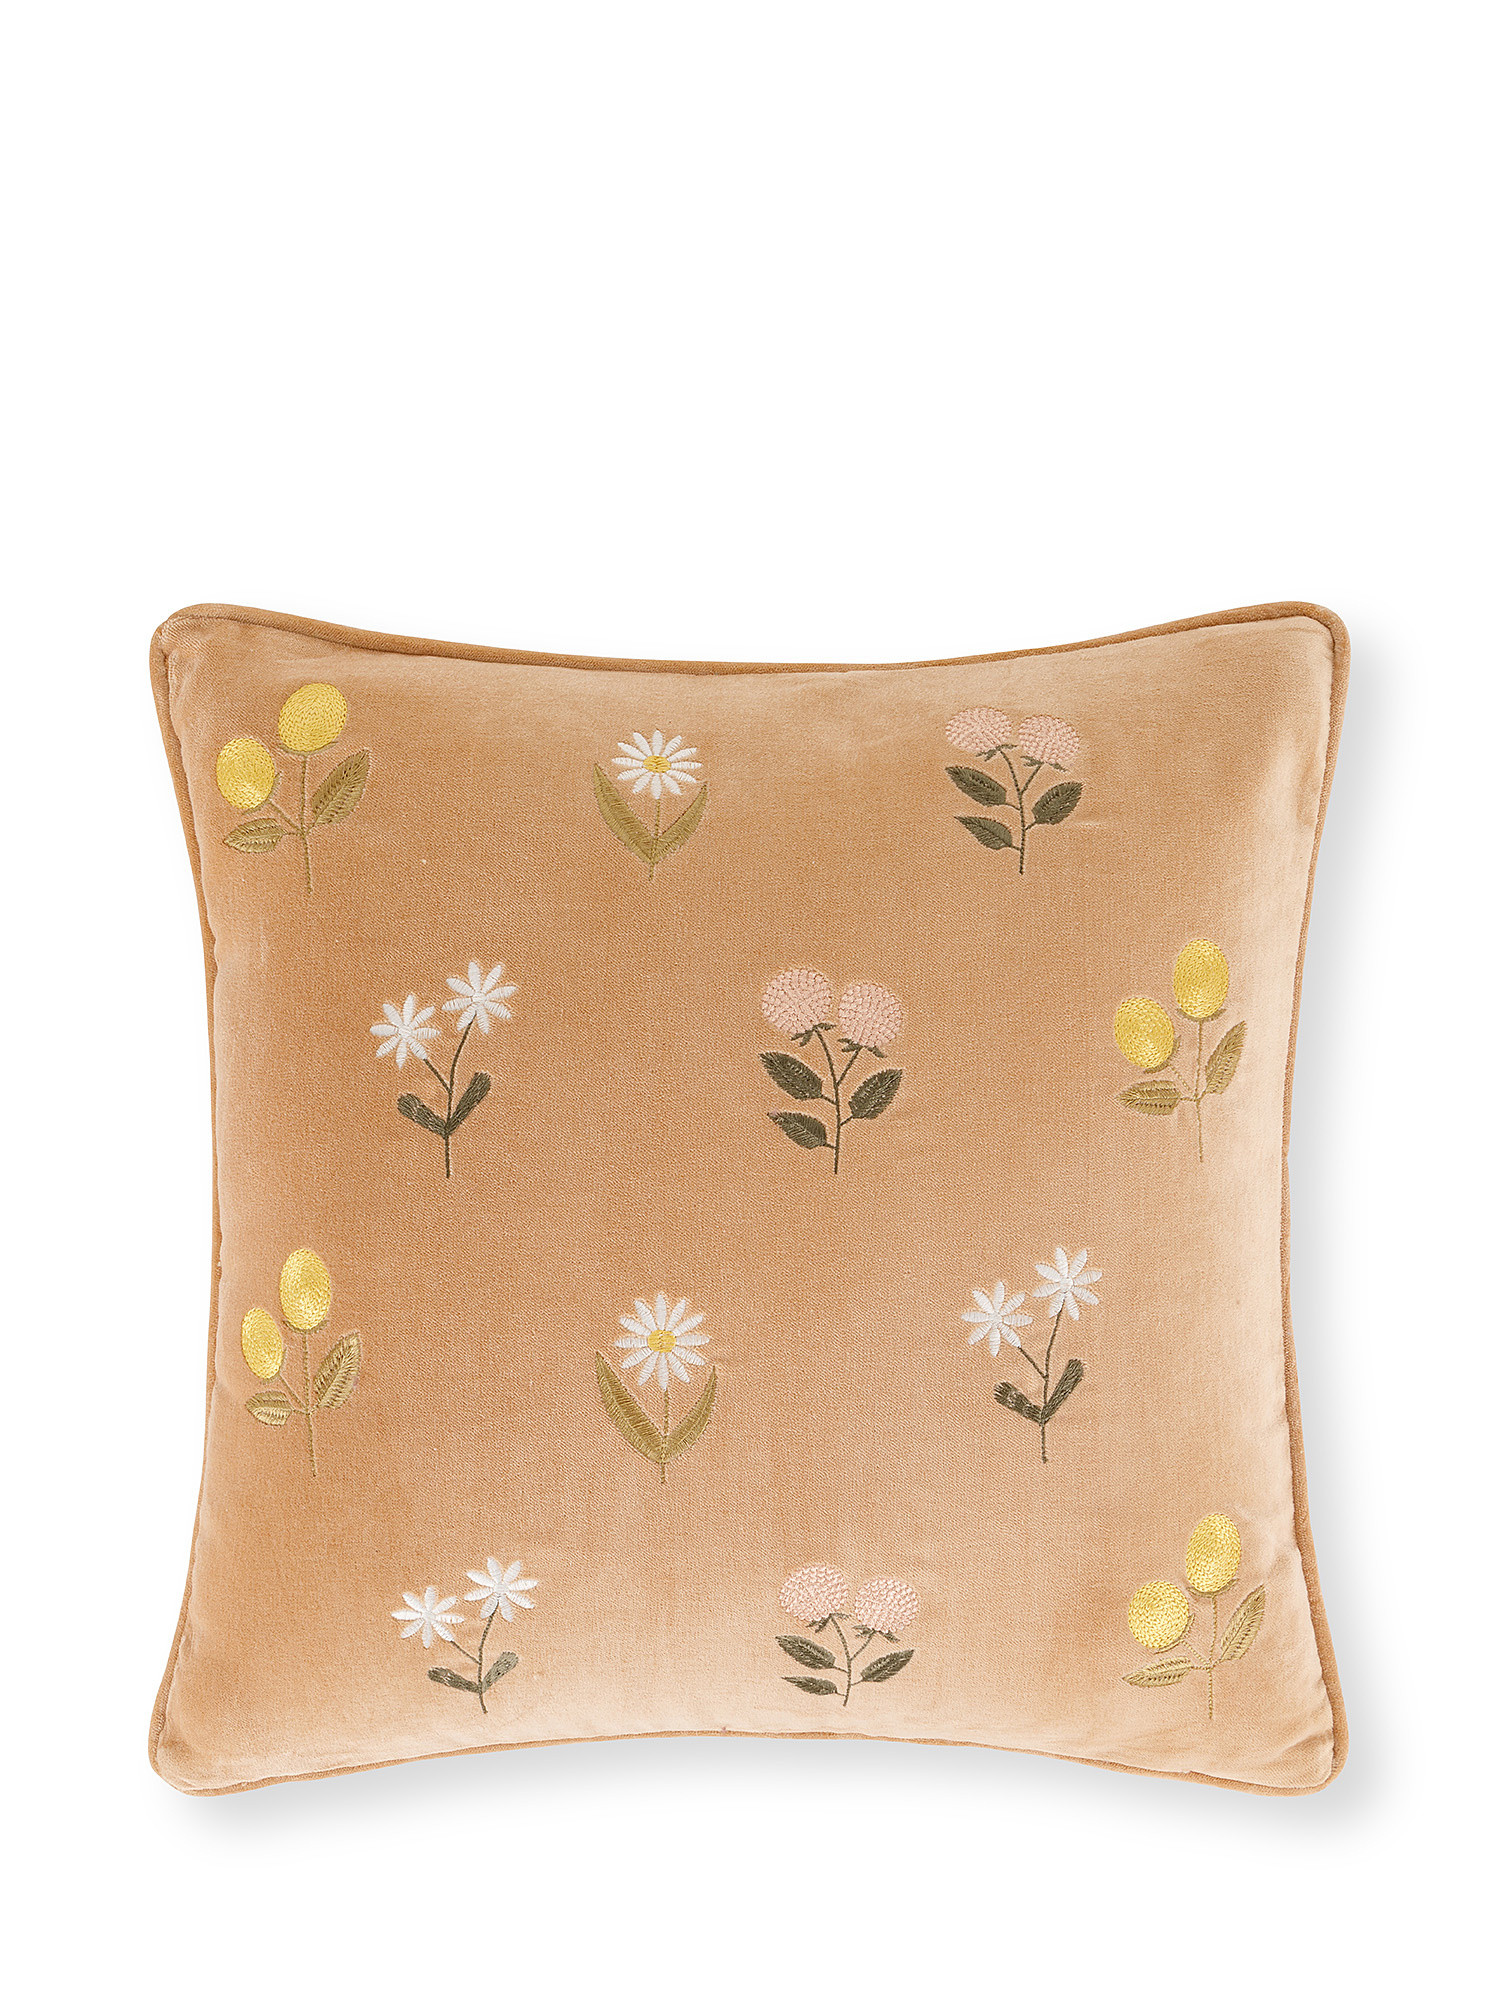 Velvet cushion with flower embroidery 45x45cm, Beige, large image number 0